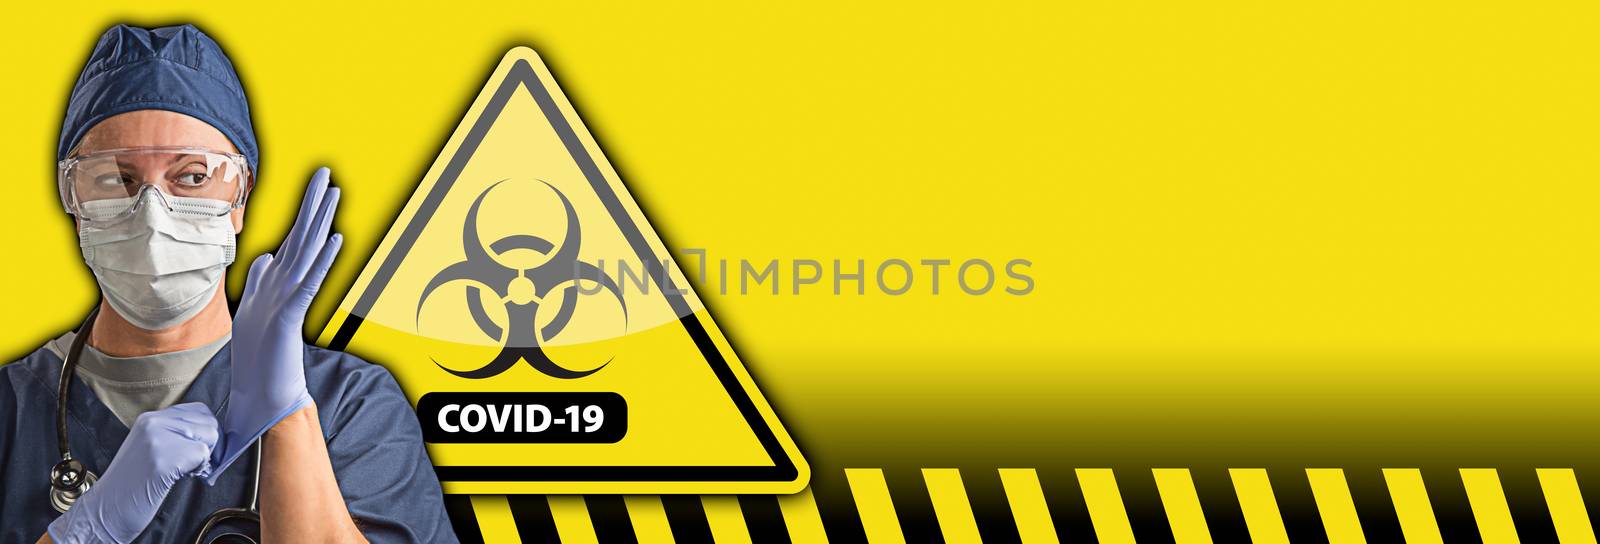 Banner of Doctor or Nurse Wearing Protective Equipment and Coronavirus COVID-19 Bio-hazard Warning Sign Behind. by Feverpitched